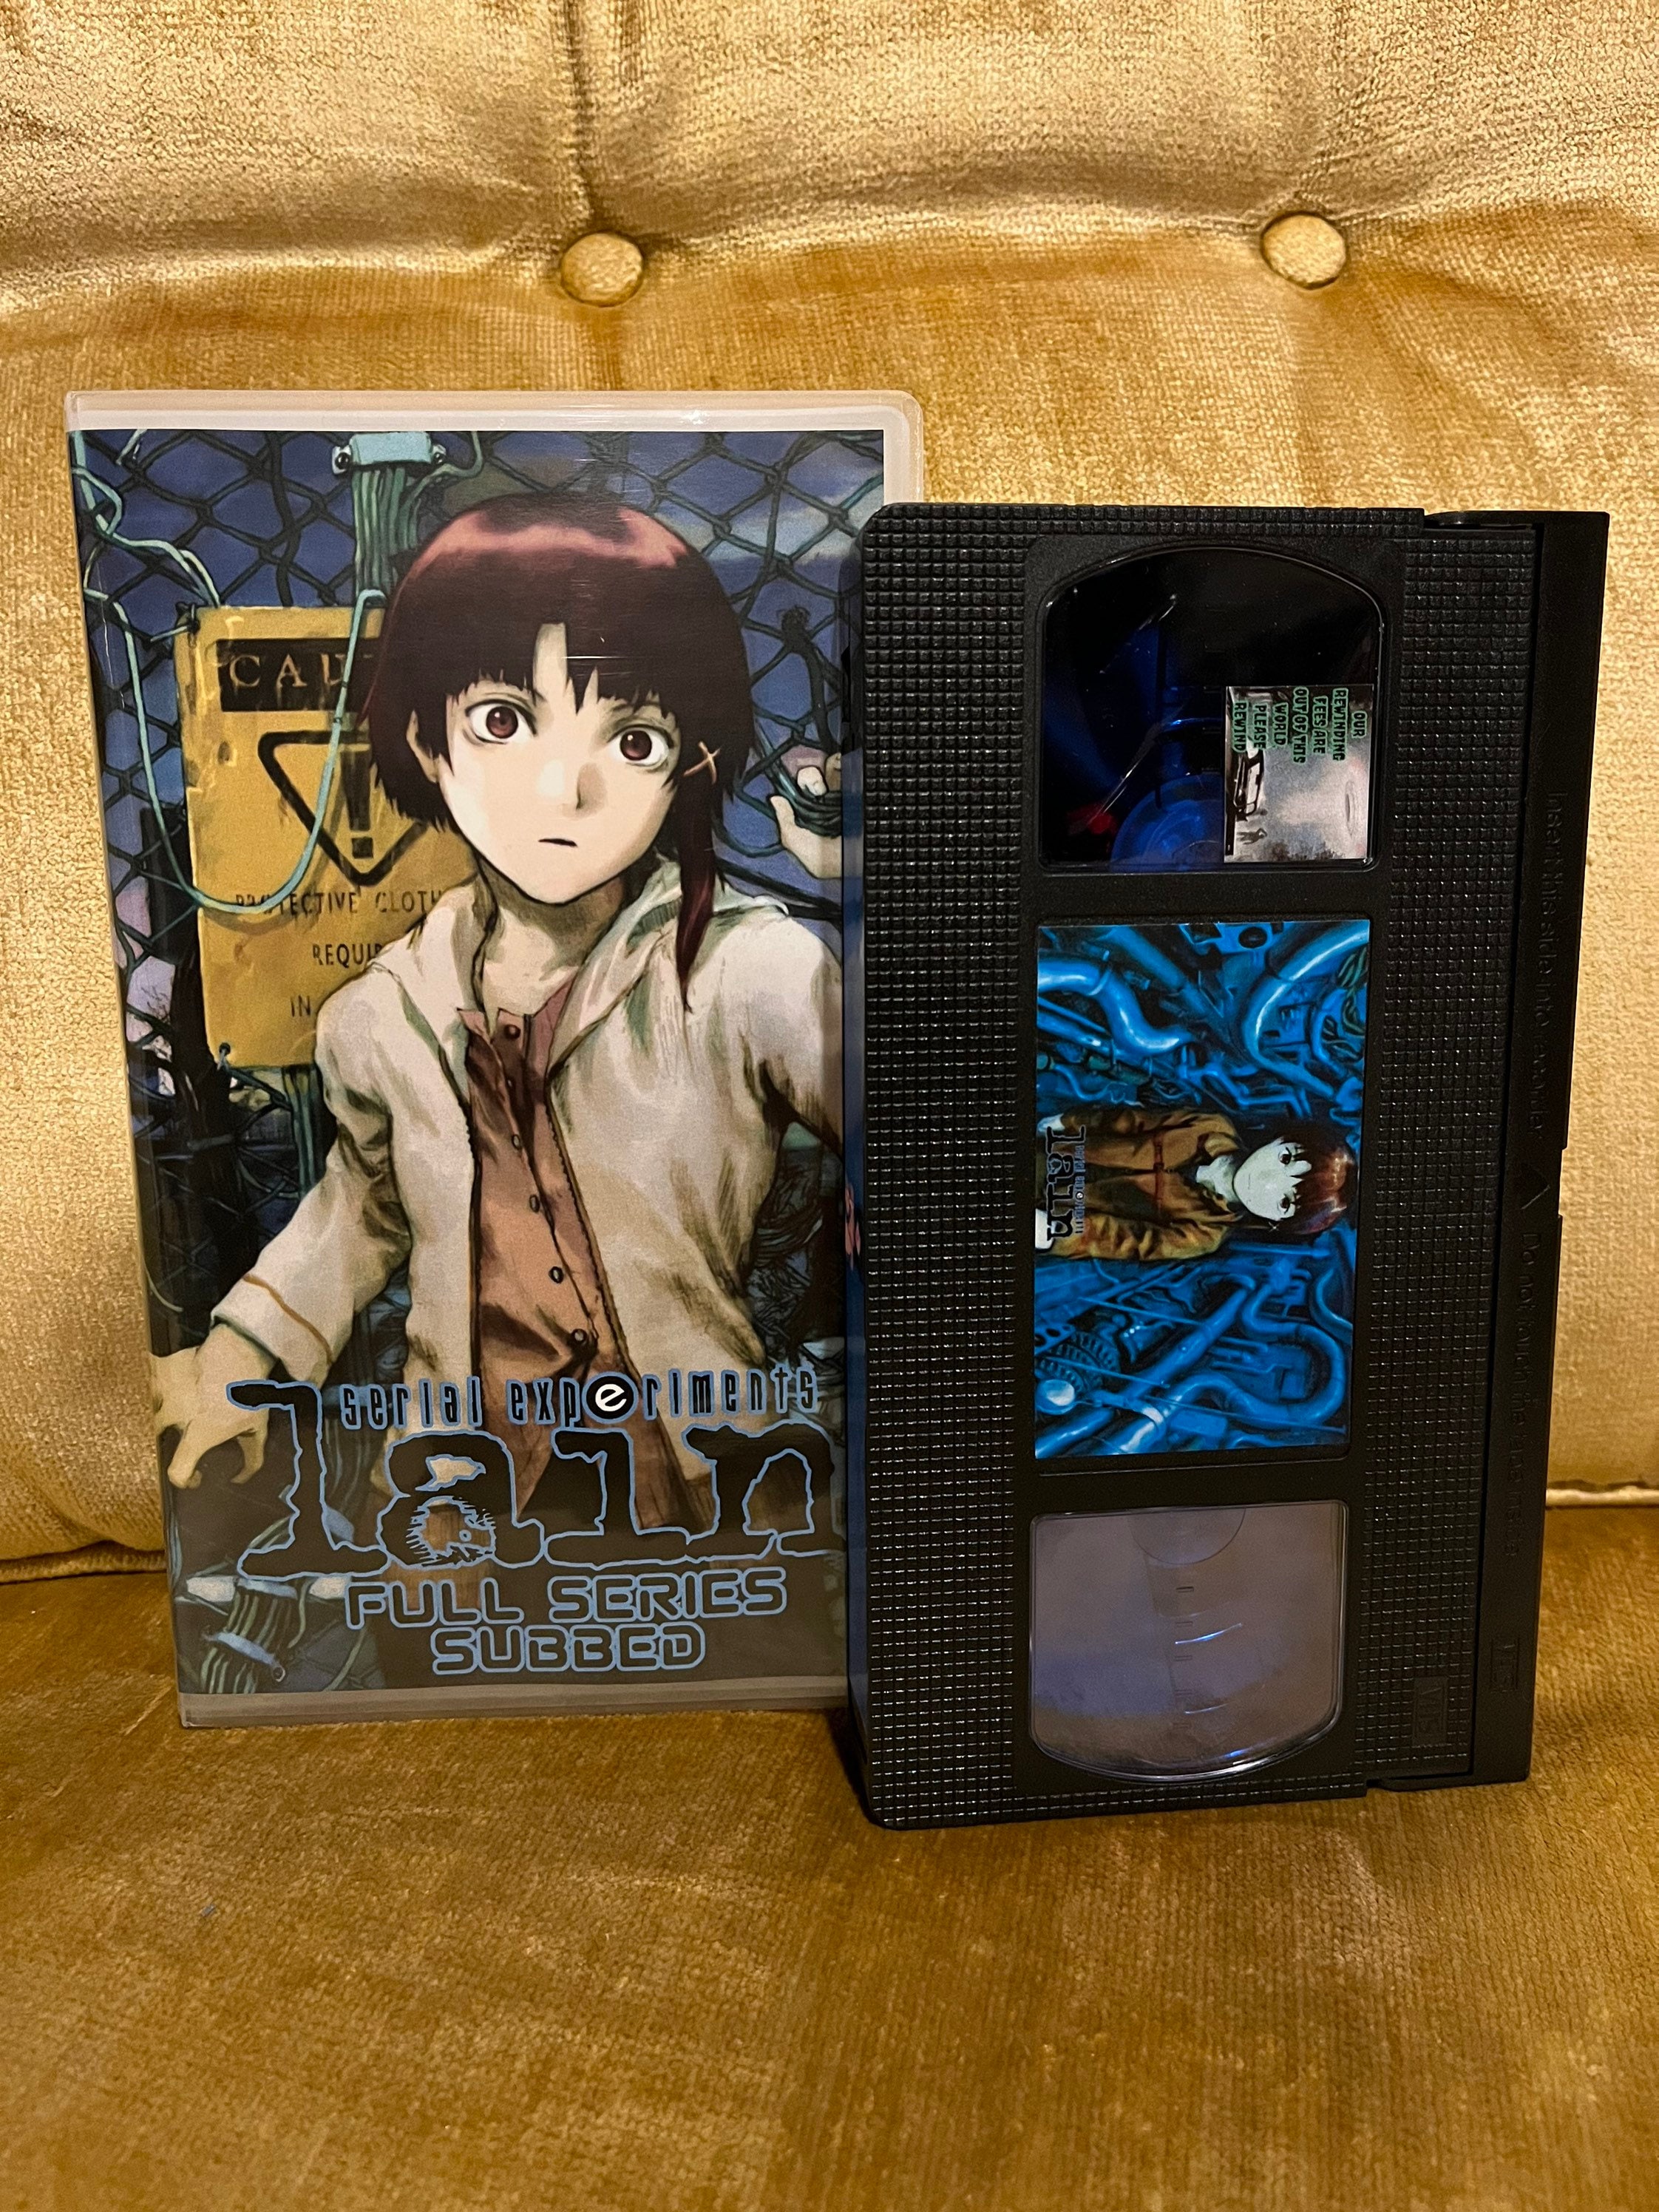 Serial Experiments Lain Complete Series VHS Subbed - Etsy